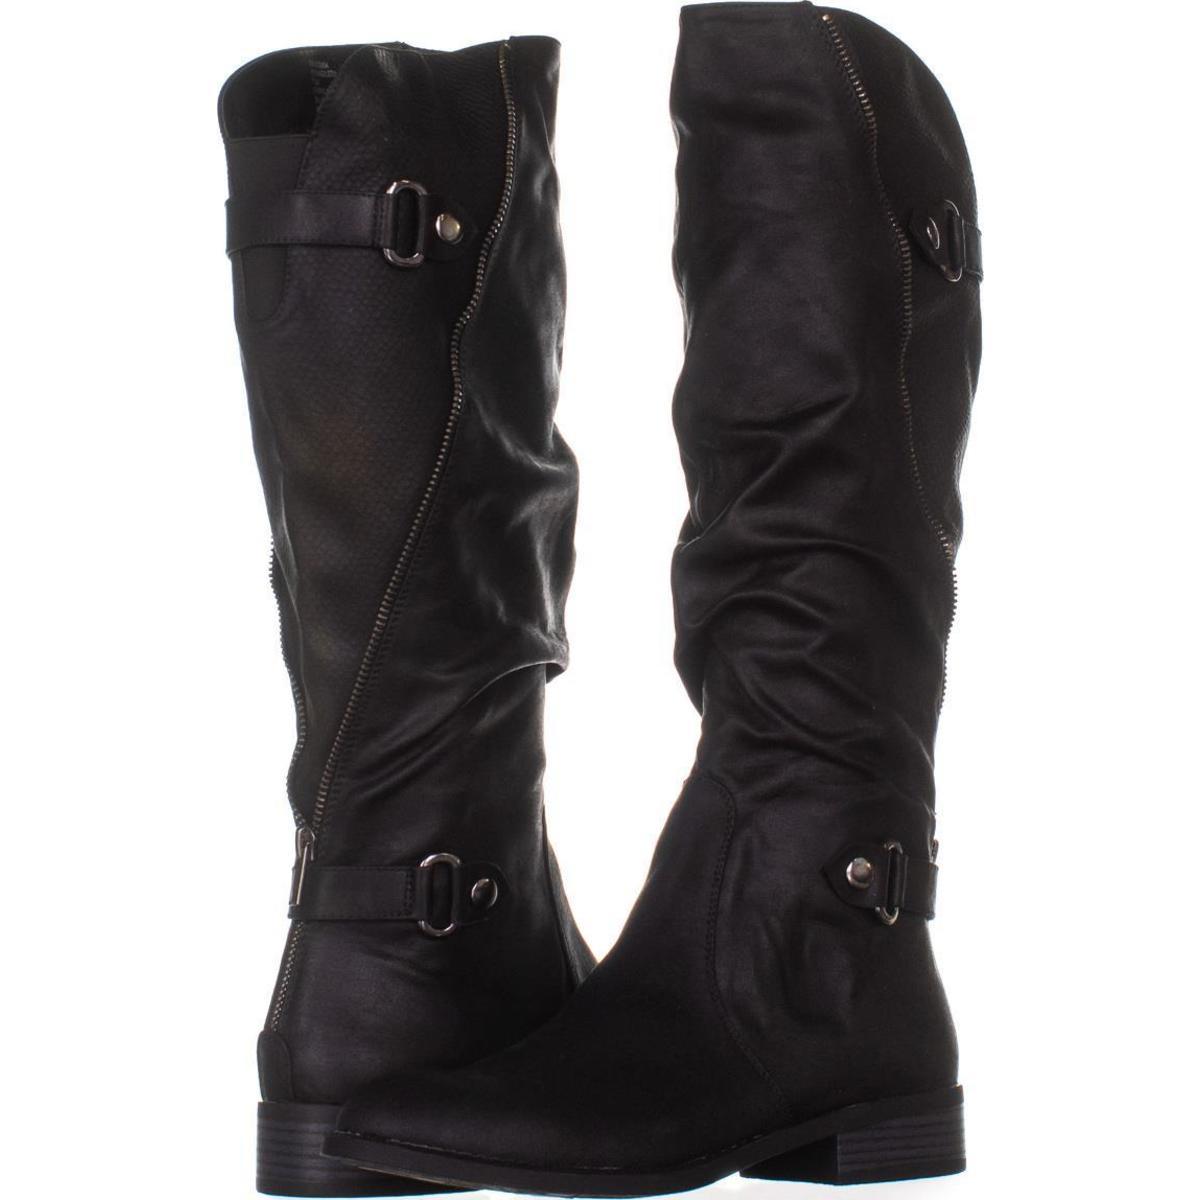 White Mountain Leto Slouch Knee High Boots 995, Black, 7.5 US - Boots